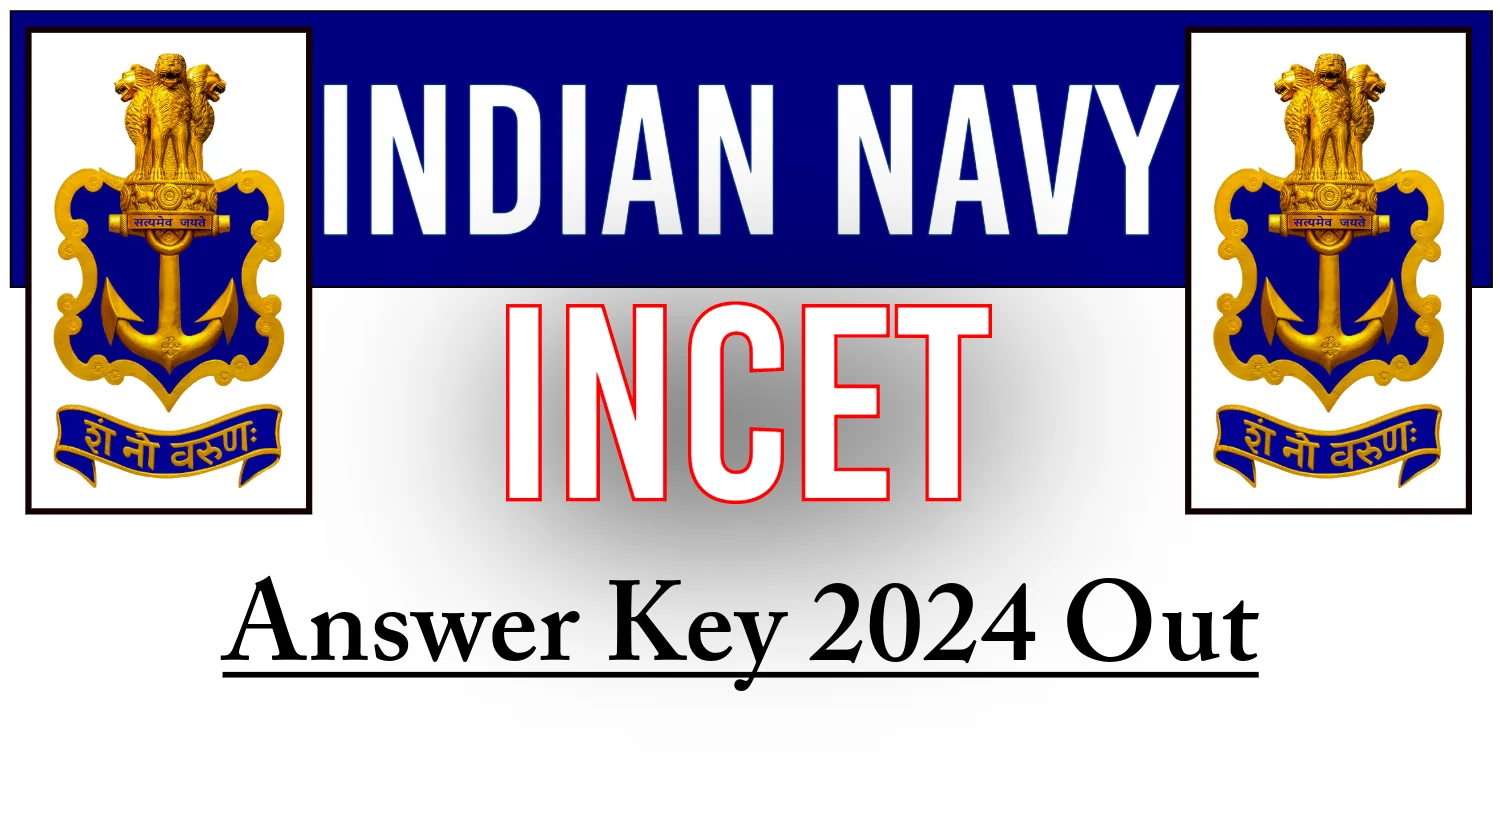 Indian Navy INCET 2024 Answer Key 